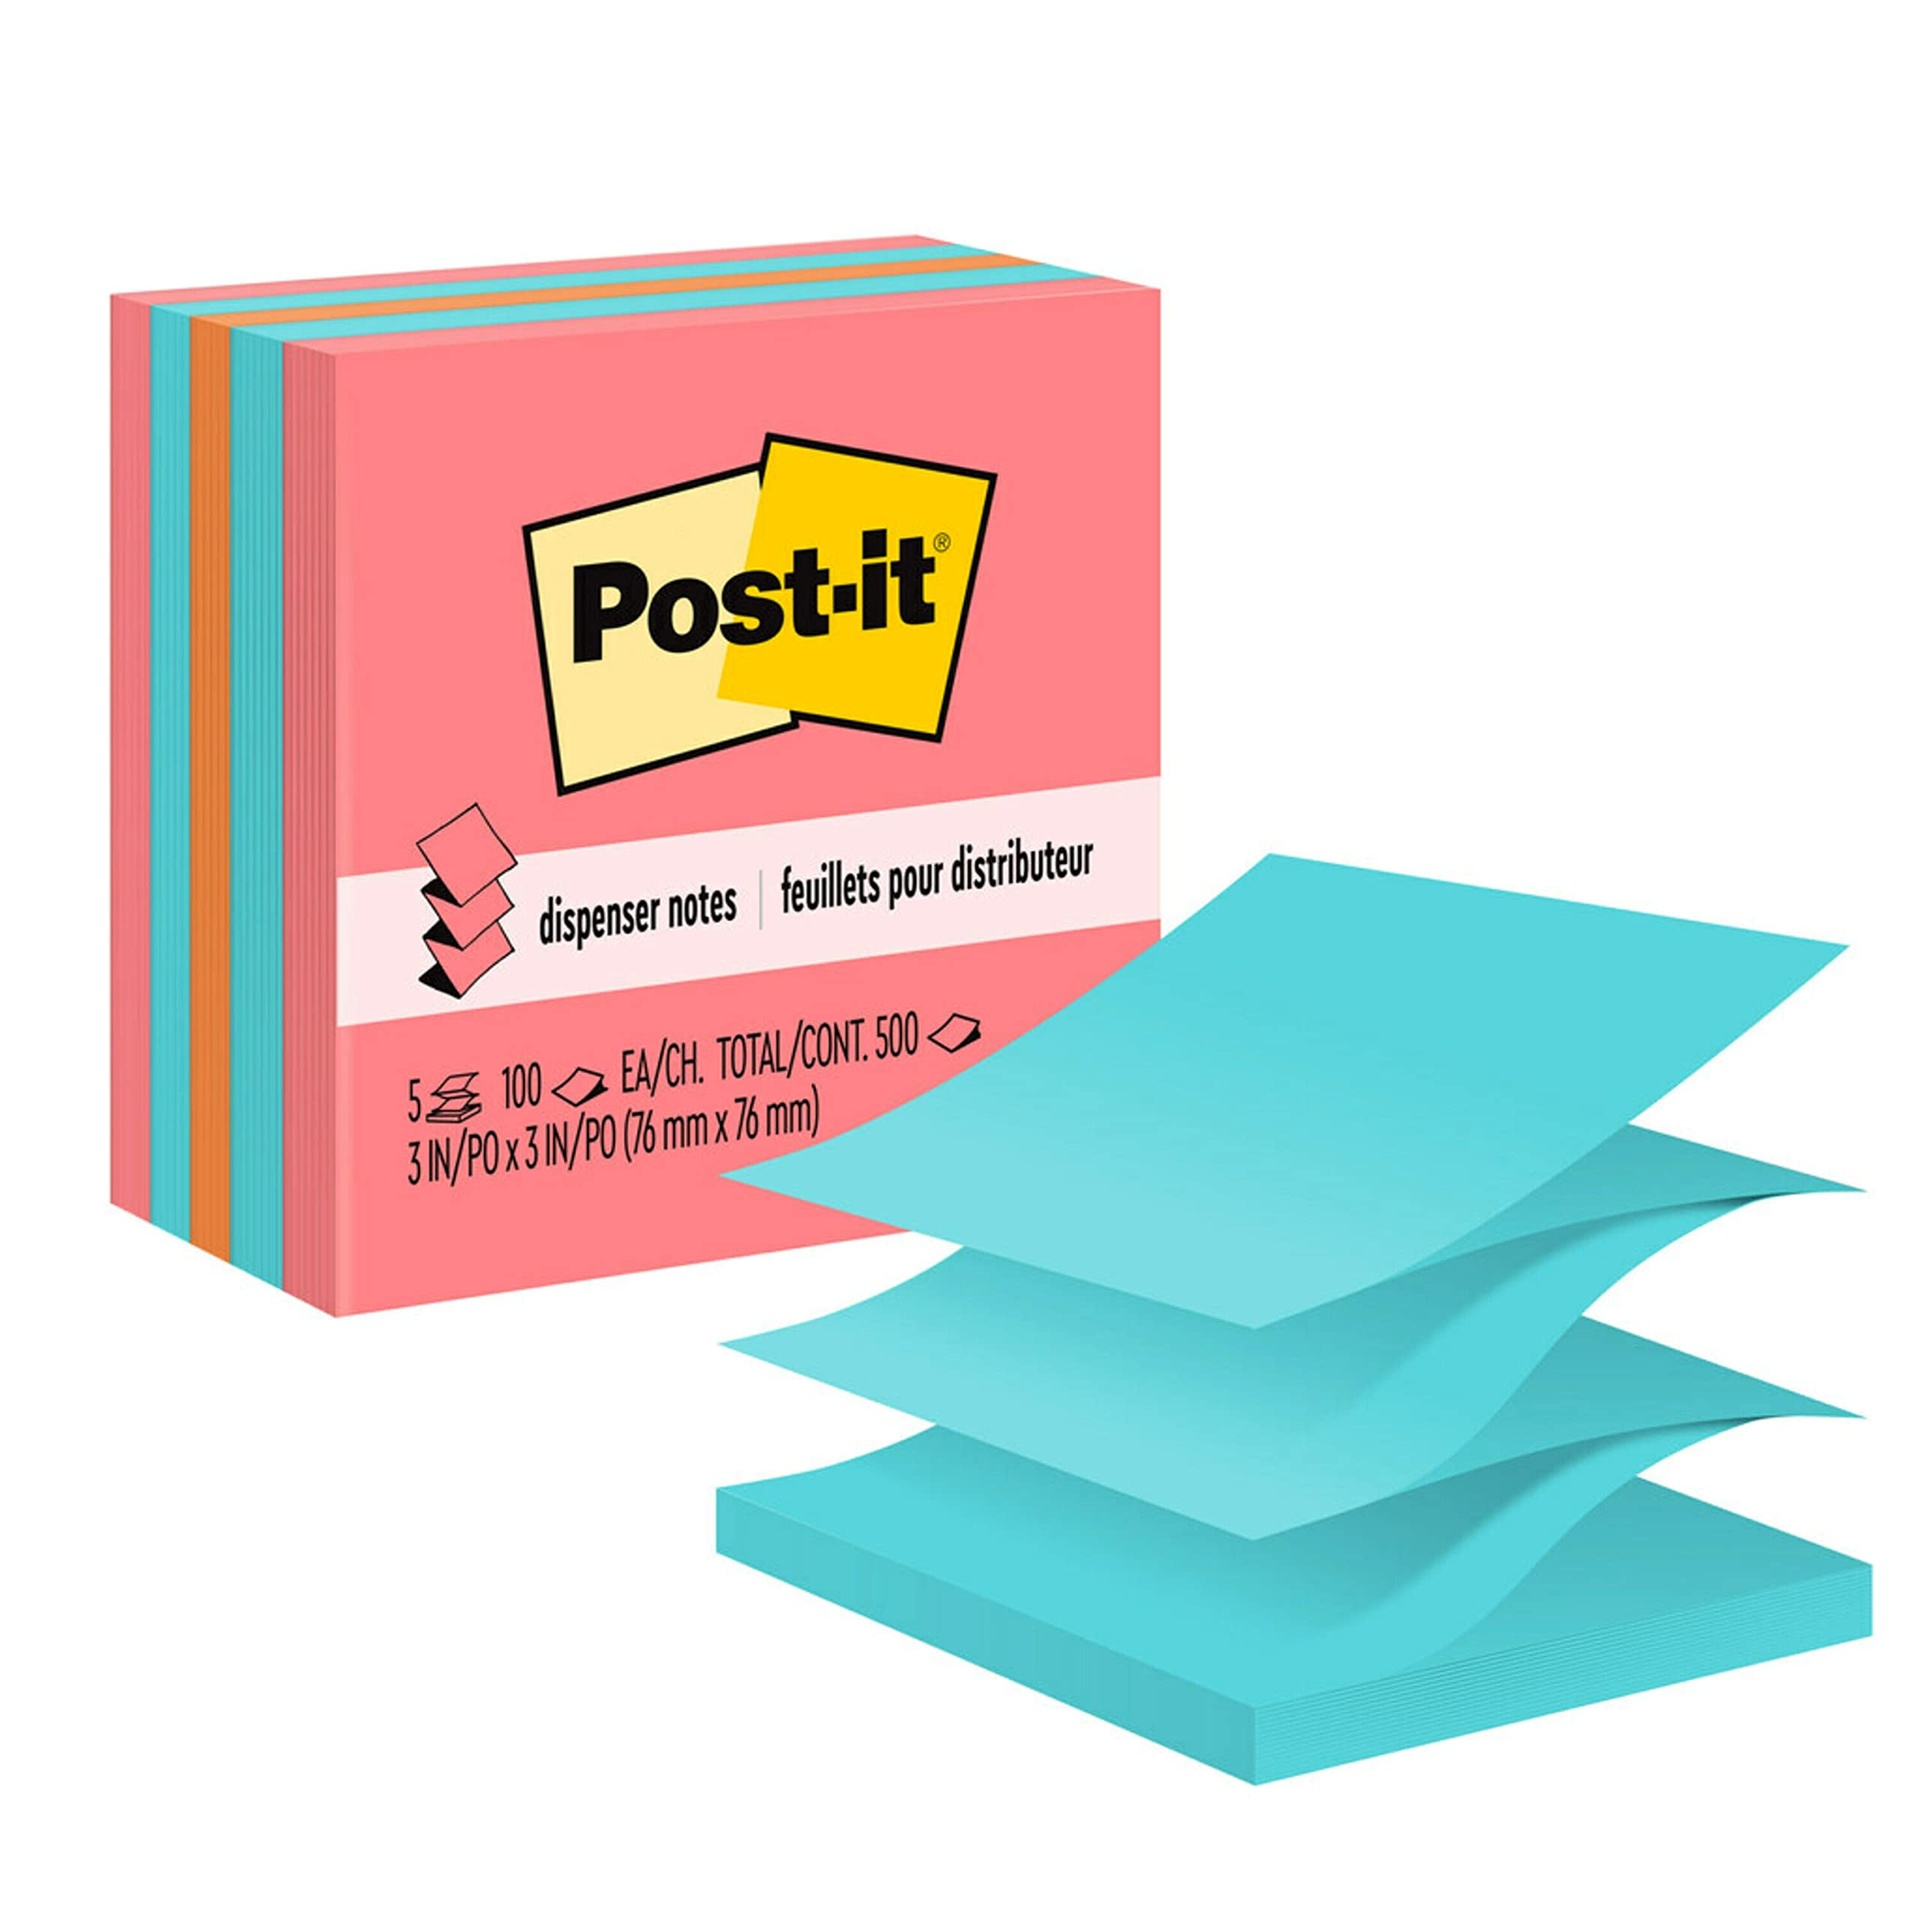 Post-it & notes